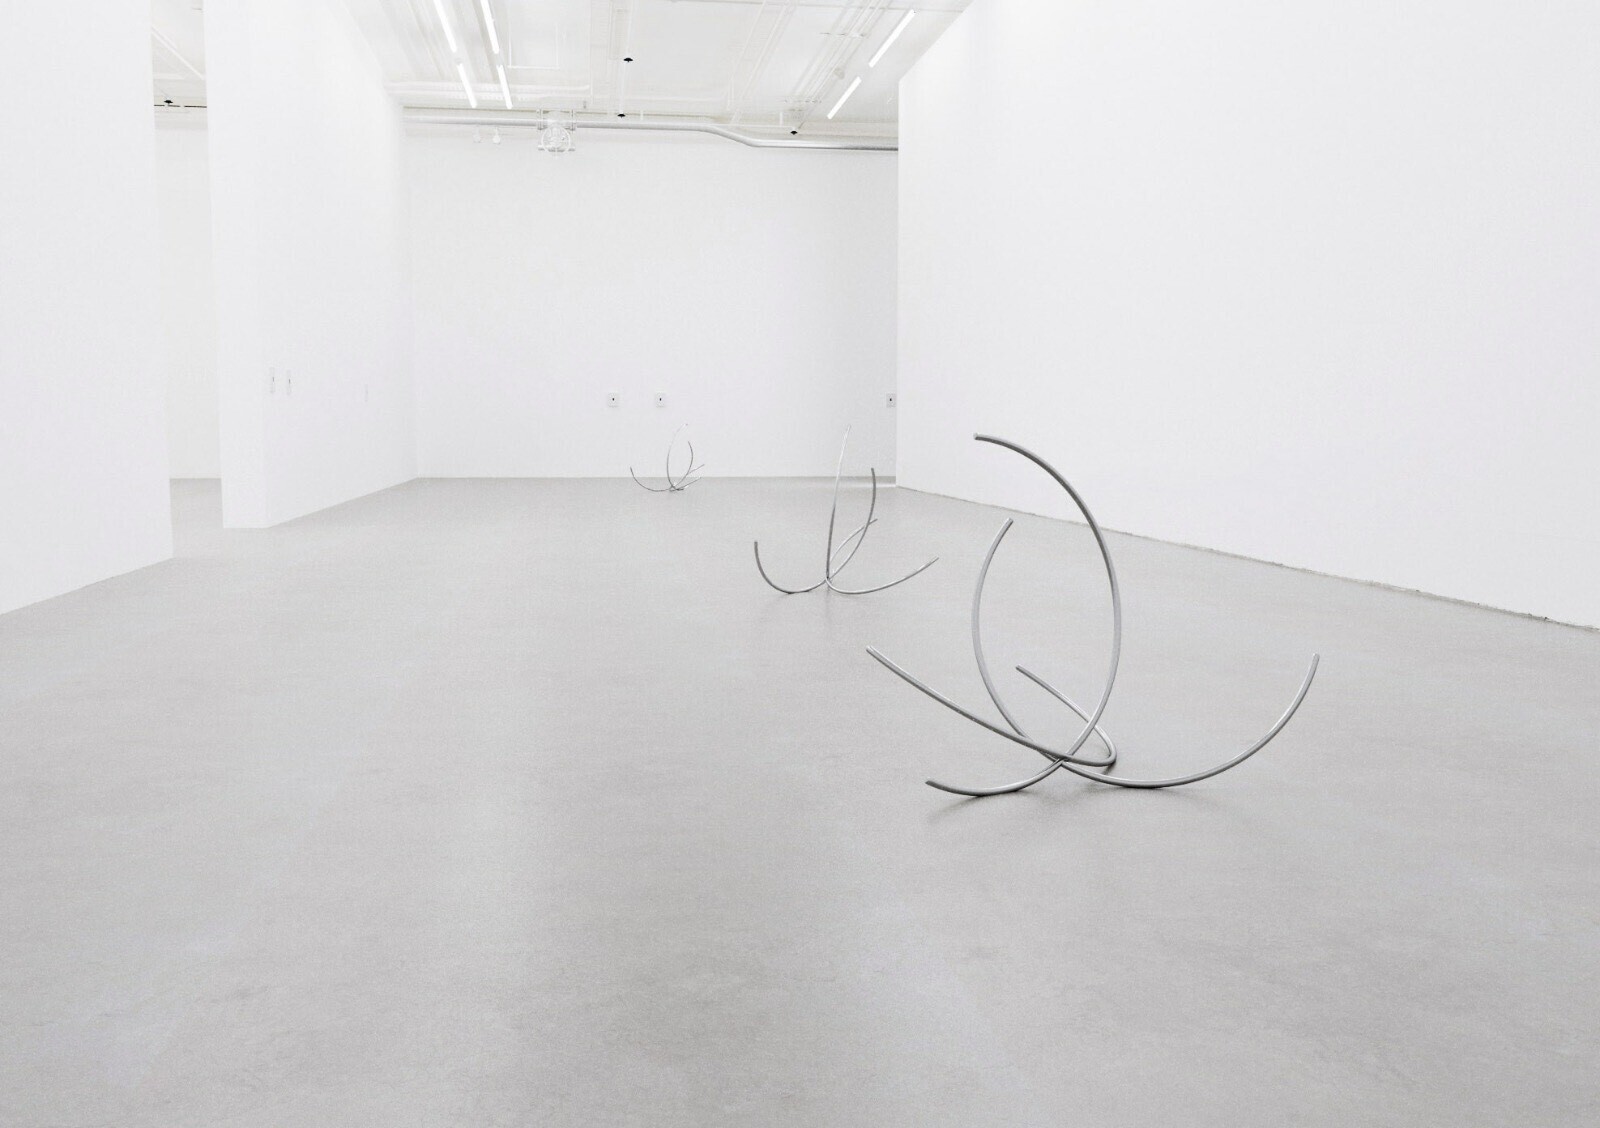 Antoine Duchenet, exhibition view at NIGHTTIMESTORY, Bouquet series, 2019-21, bunch of stainless steel curves, variable dimensions